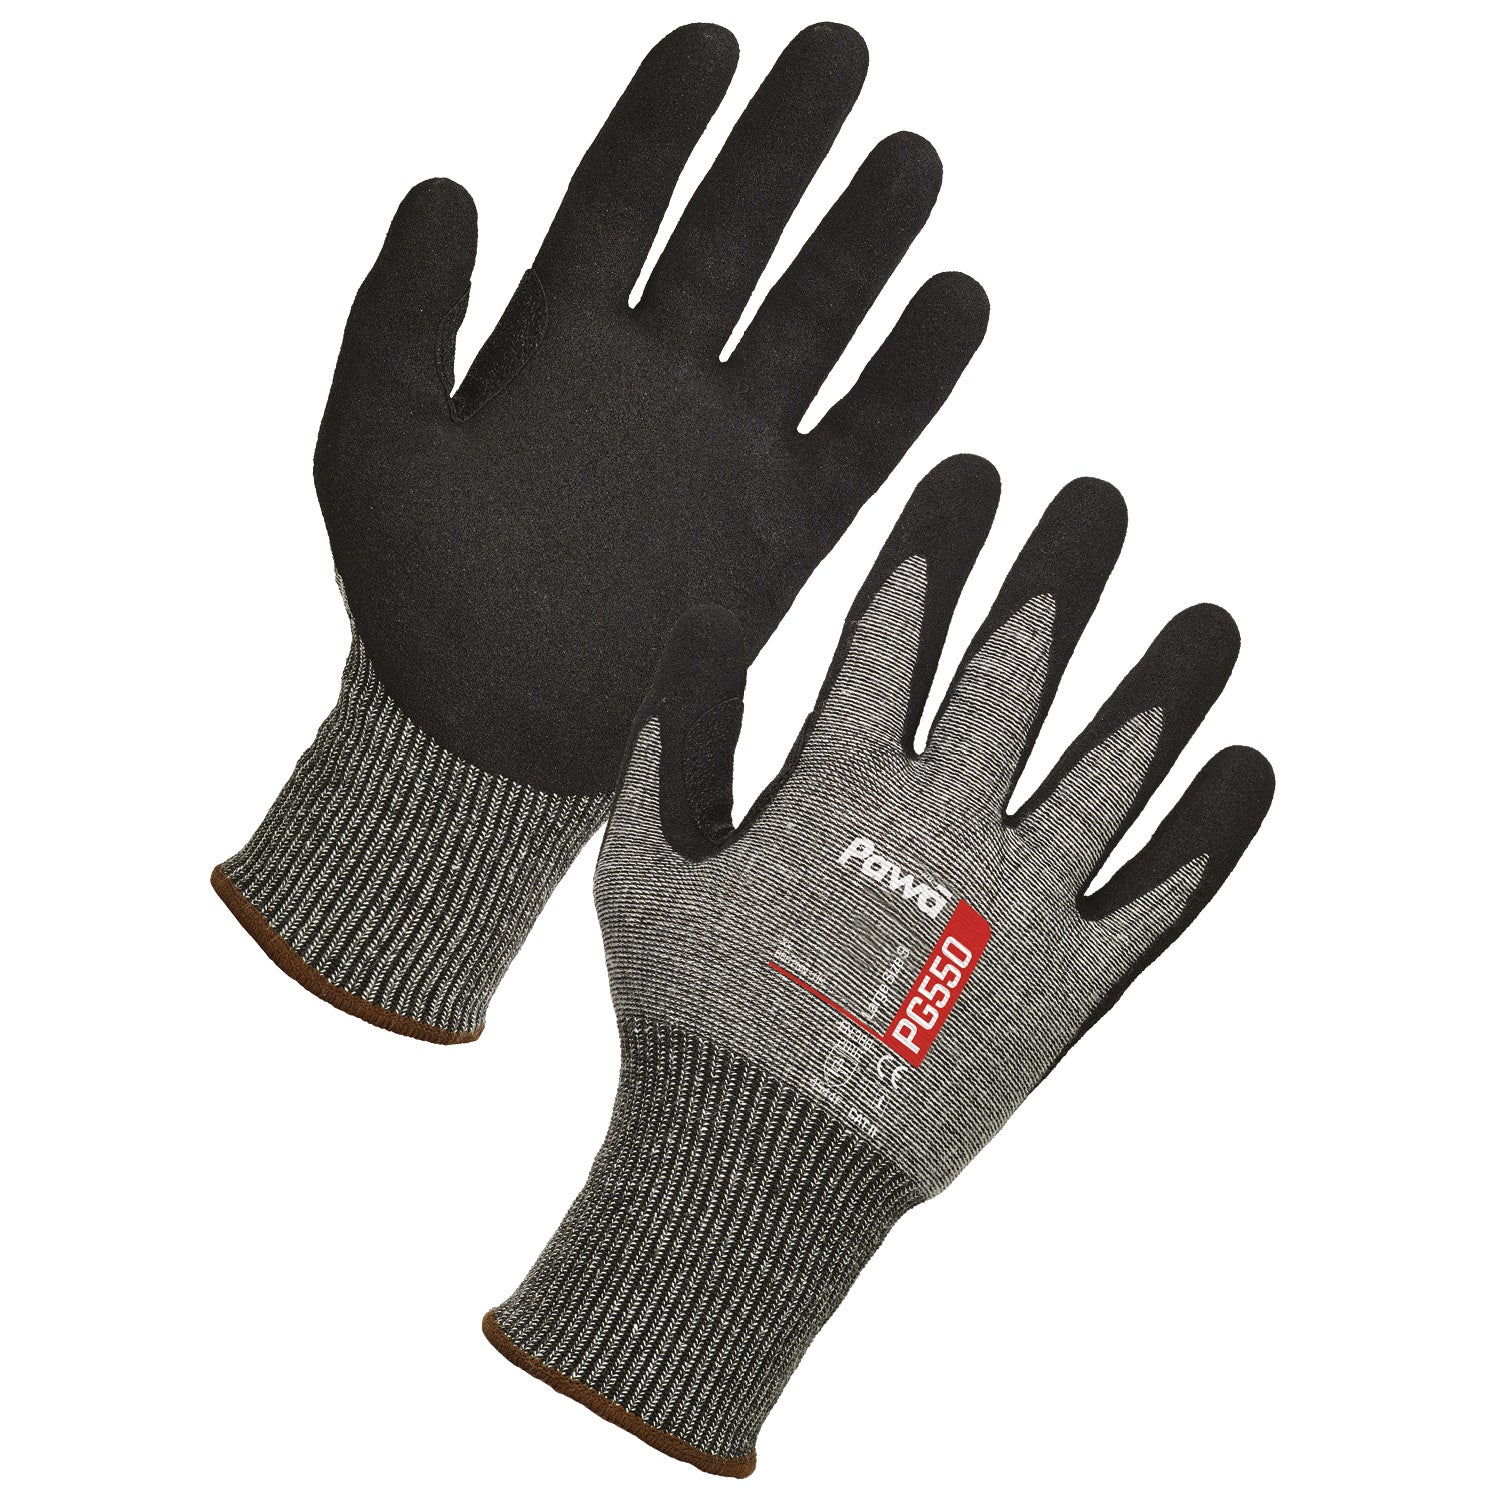 Supertouch Pawa PG550 Gloves